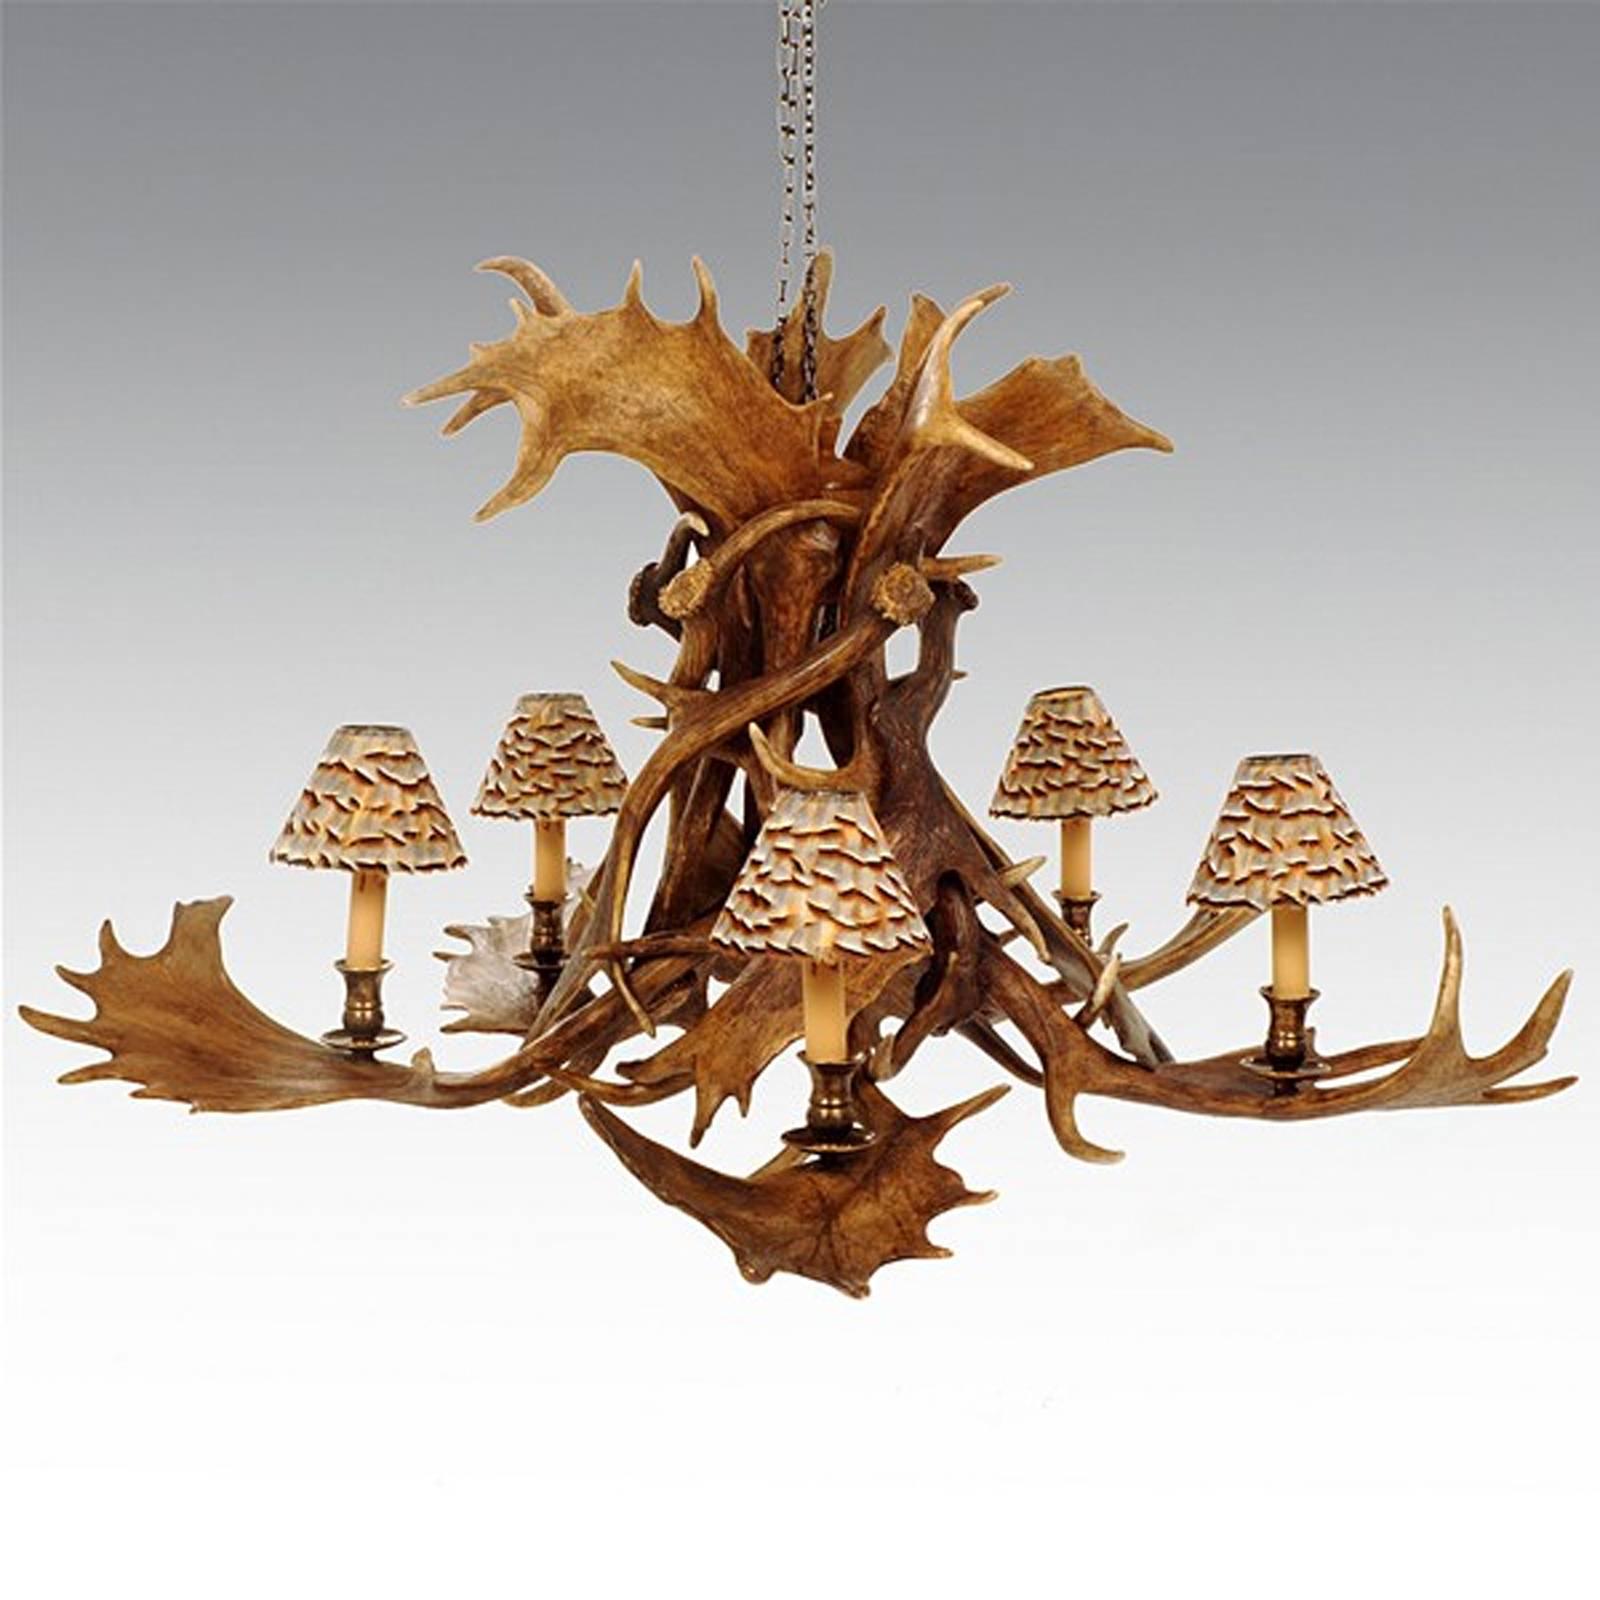 Chandelier reindeer master with five reindeer antlers,
in vintage brass finish, five bulbs and five partridge feather,
lampshade.
